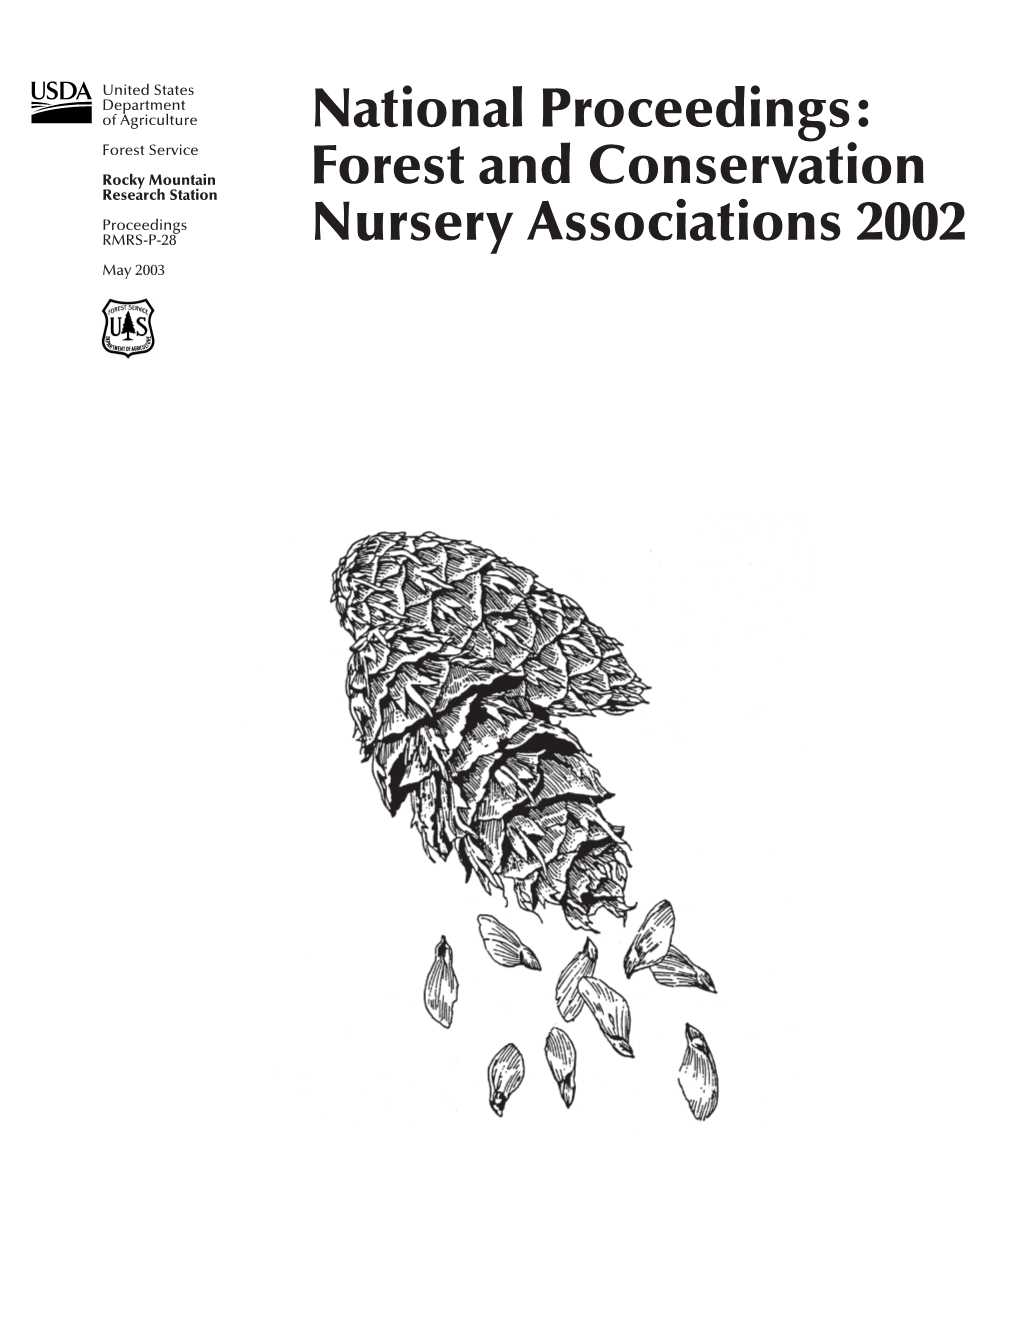 Forest and Conservation Nursery Associations 2002